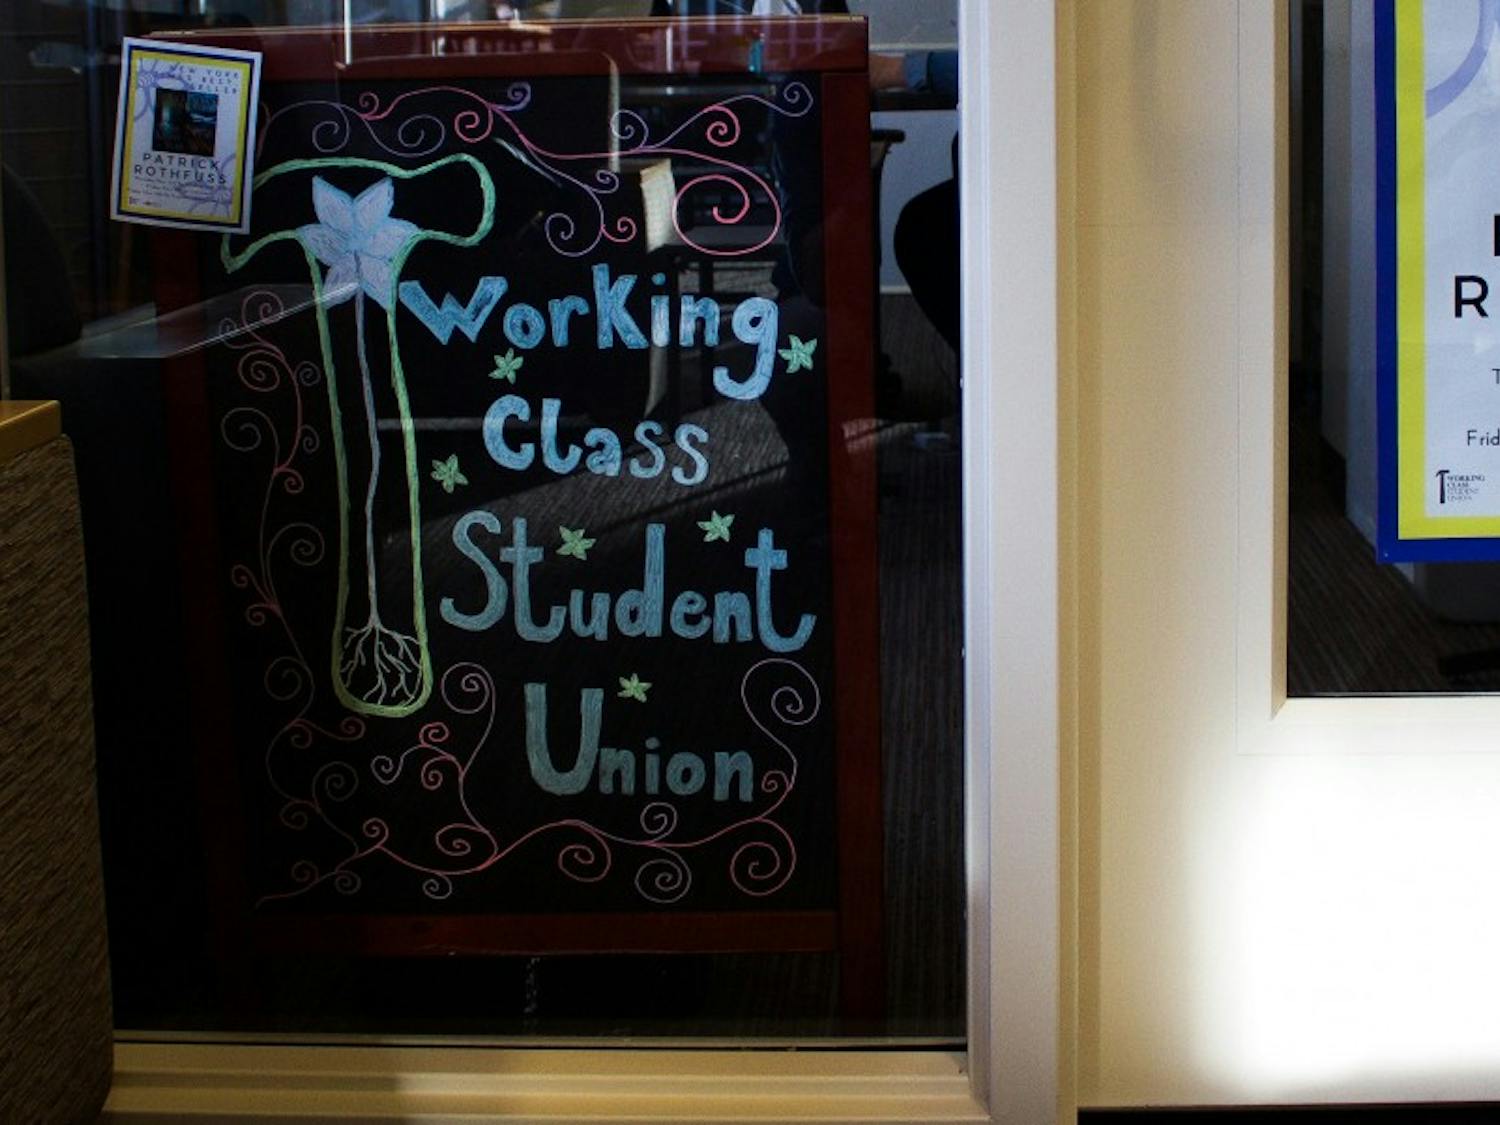 UW-Madison’s Working Class Student Union had their budget approved Thursday.